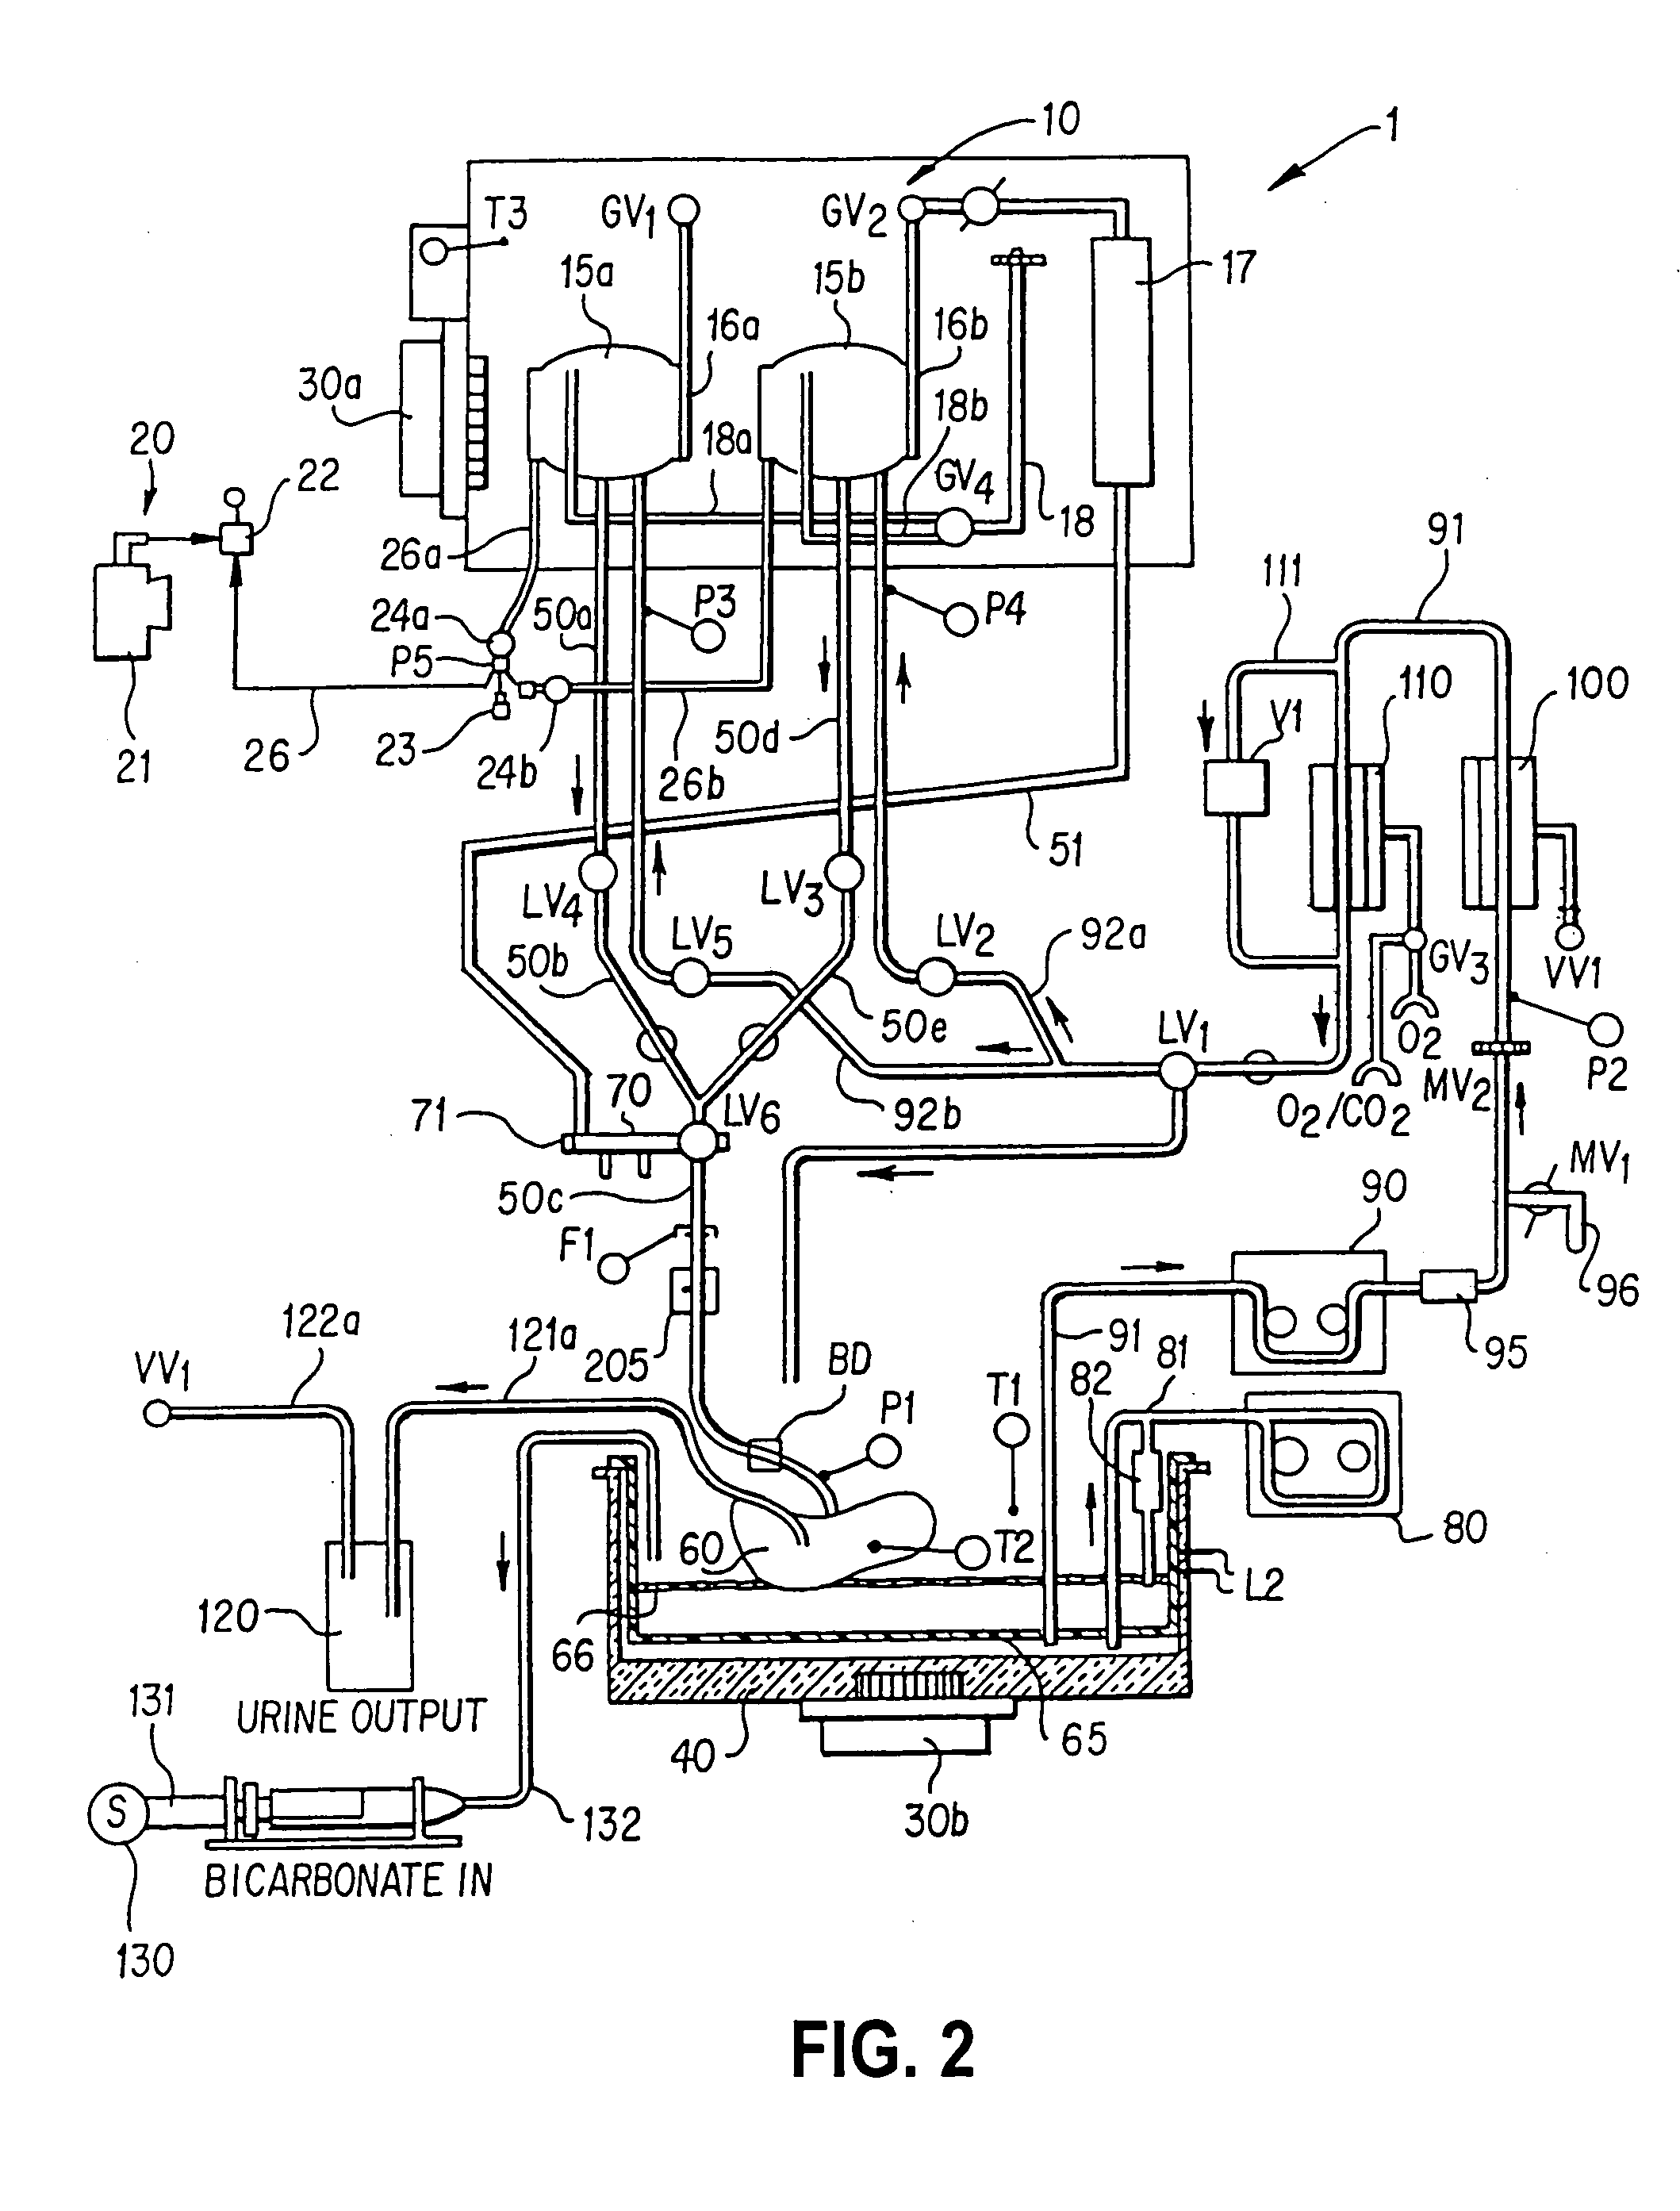 Apparatus and method for perfusion and determining the viability of an organ